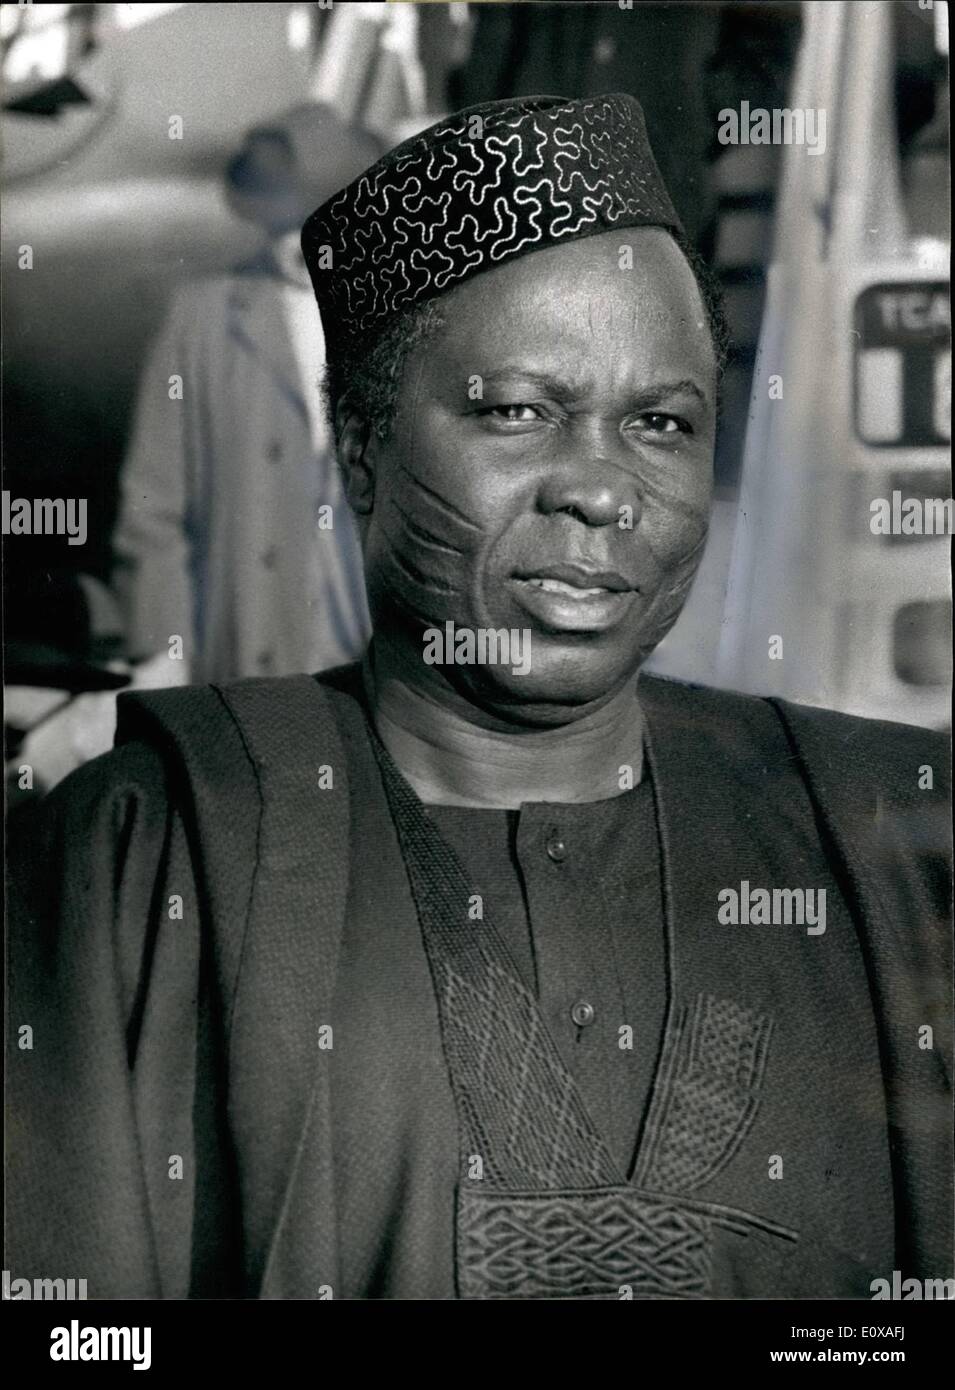 Jan. 01, 1966 - NIGERIAN MUTINT PREMIER ARRESTED AND REGIONAL LEADERS REPORTED SHOT Nigeria, West Afrioaqi biggest State was poised on the brink of civil war last night as Arm' loaders loyal to the Federal Government eought to quell an attempted coup d,etat by dissadent military elements, The Prime-Minister, SIR ABUBAKAR TAFAWA BALEWA is said to have been kidnapped and reliable sources also say that Chief AKINTOLL, Western Region Premier, and SIR AHMADU BELLO, Premier of the Northern Region, and his wife, were among a number of prominent pro Government supporters killed by the insurgents Stock Photo